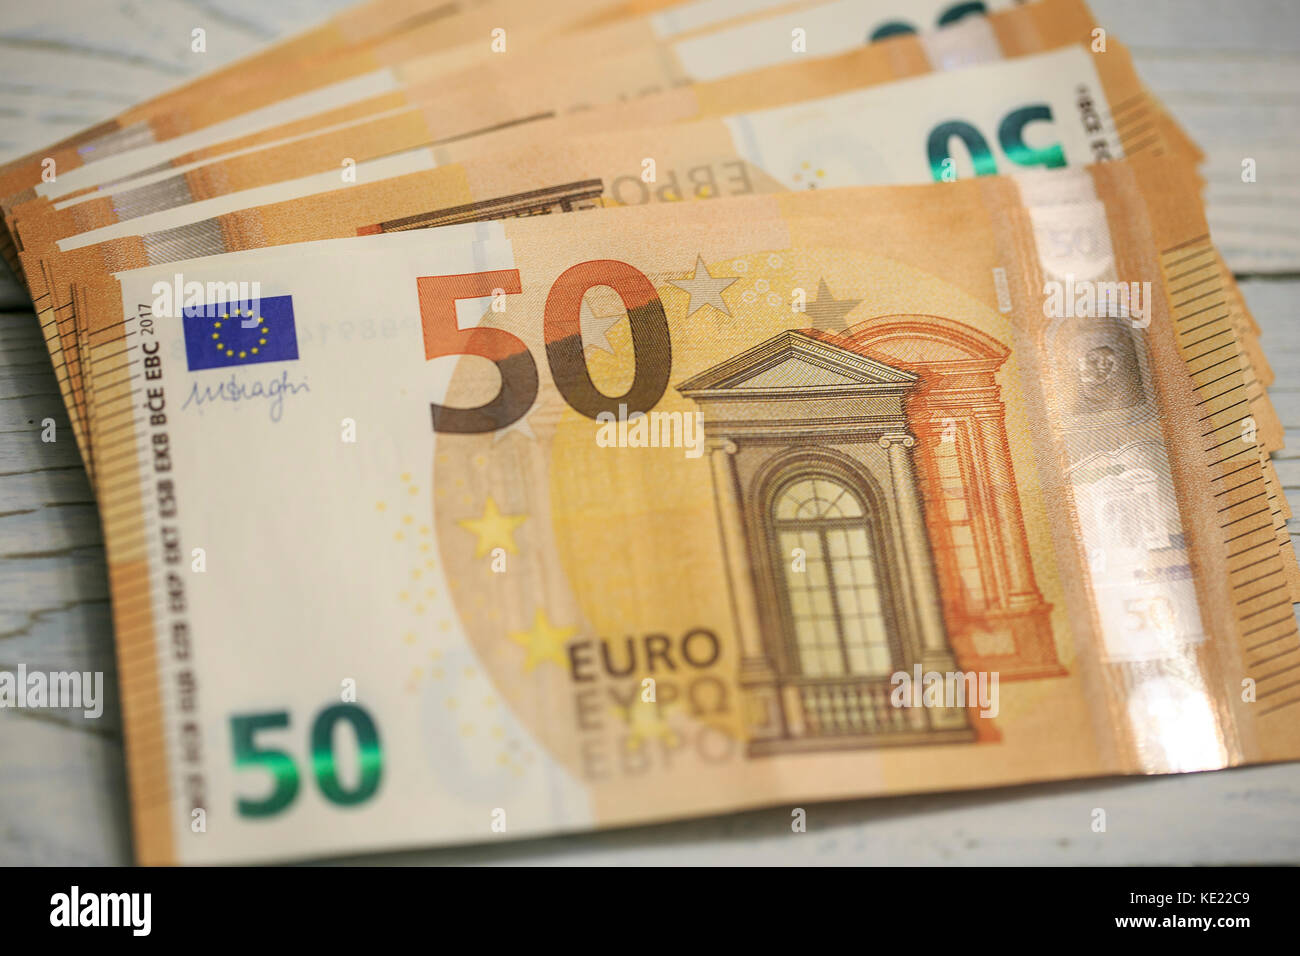 50 Euros High Resolution Stock Photography and Images - Alamy